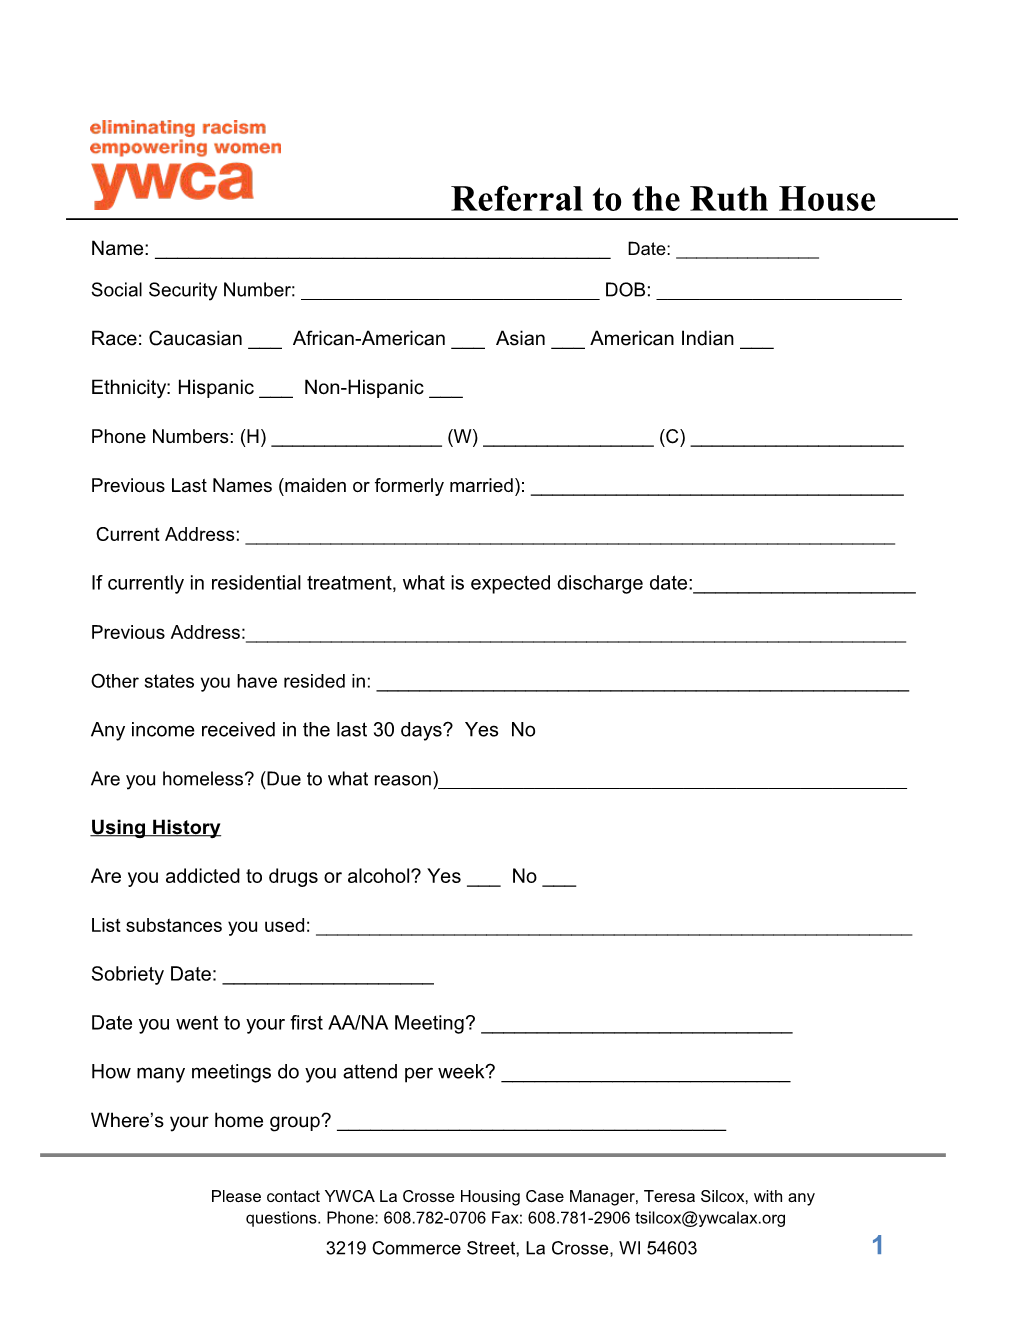 Referral to the Ruth House